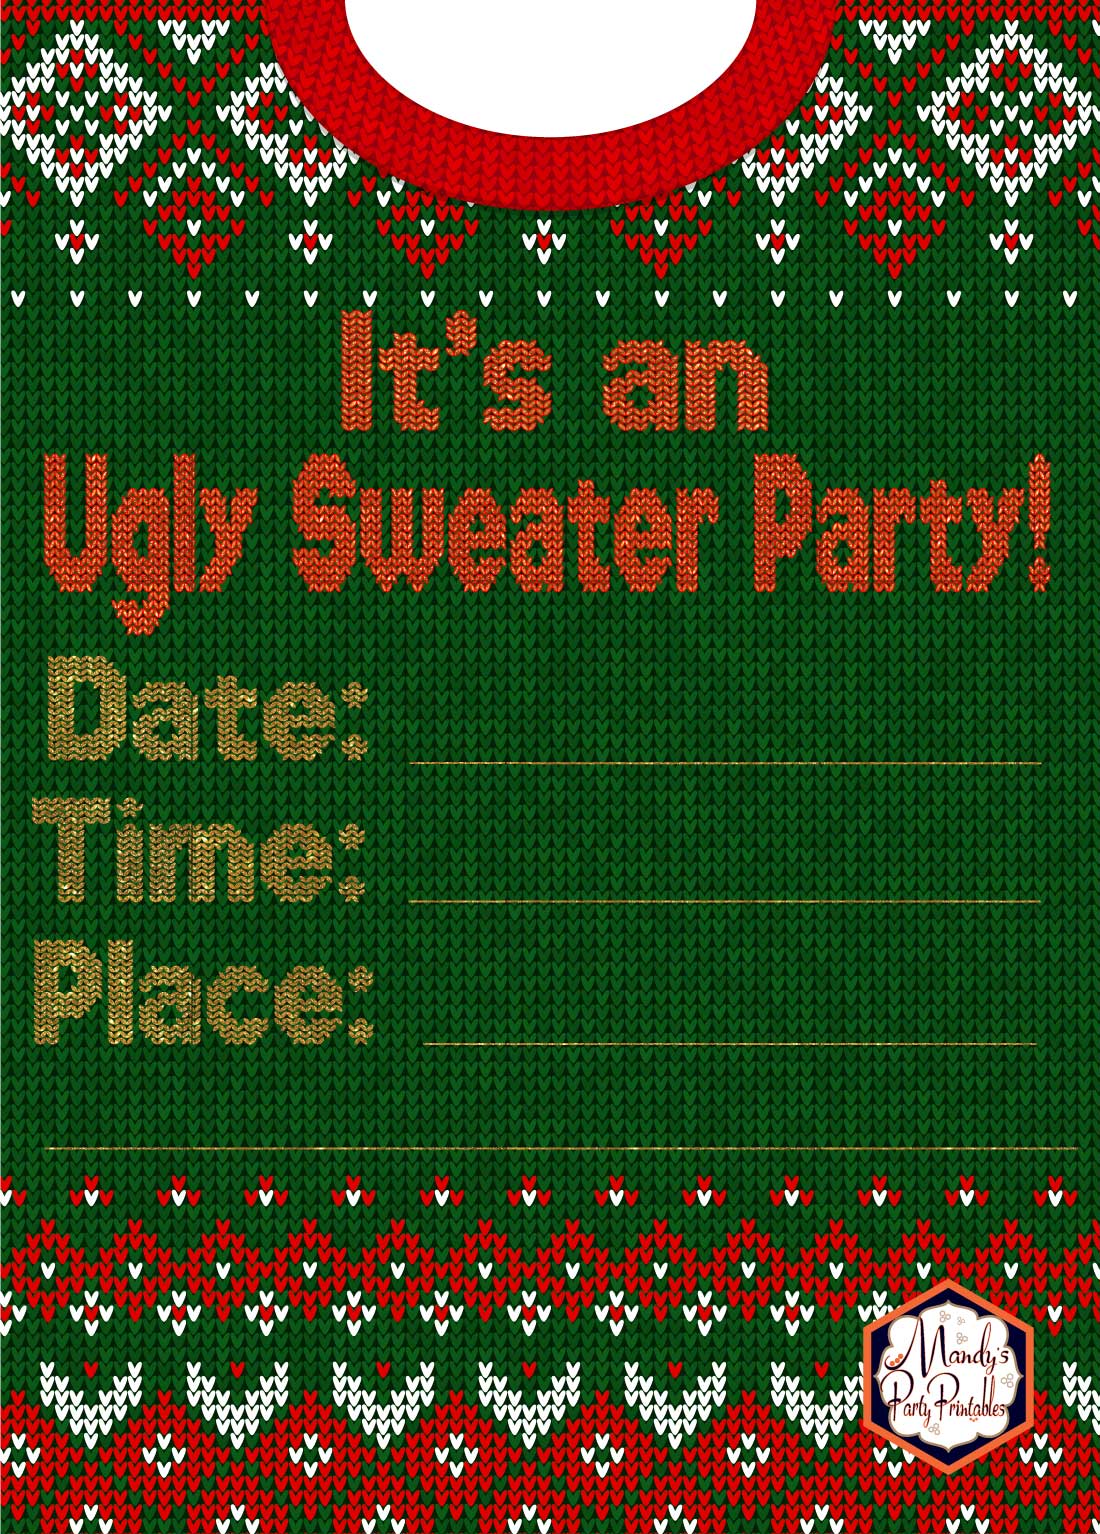 Invitation from Ugly Sweater Christmas Party Printables via Mandy's Party Printables